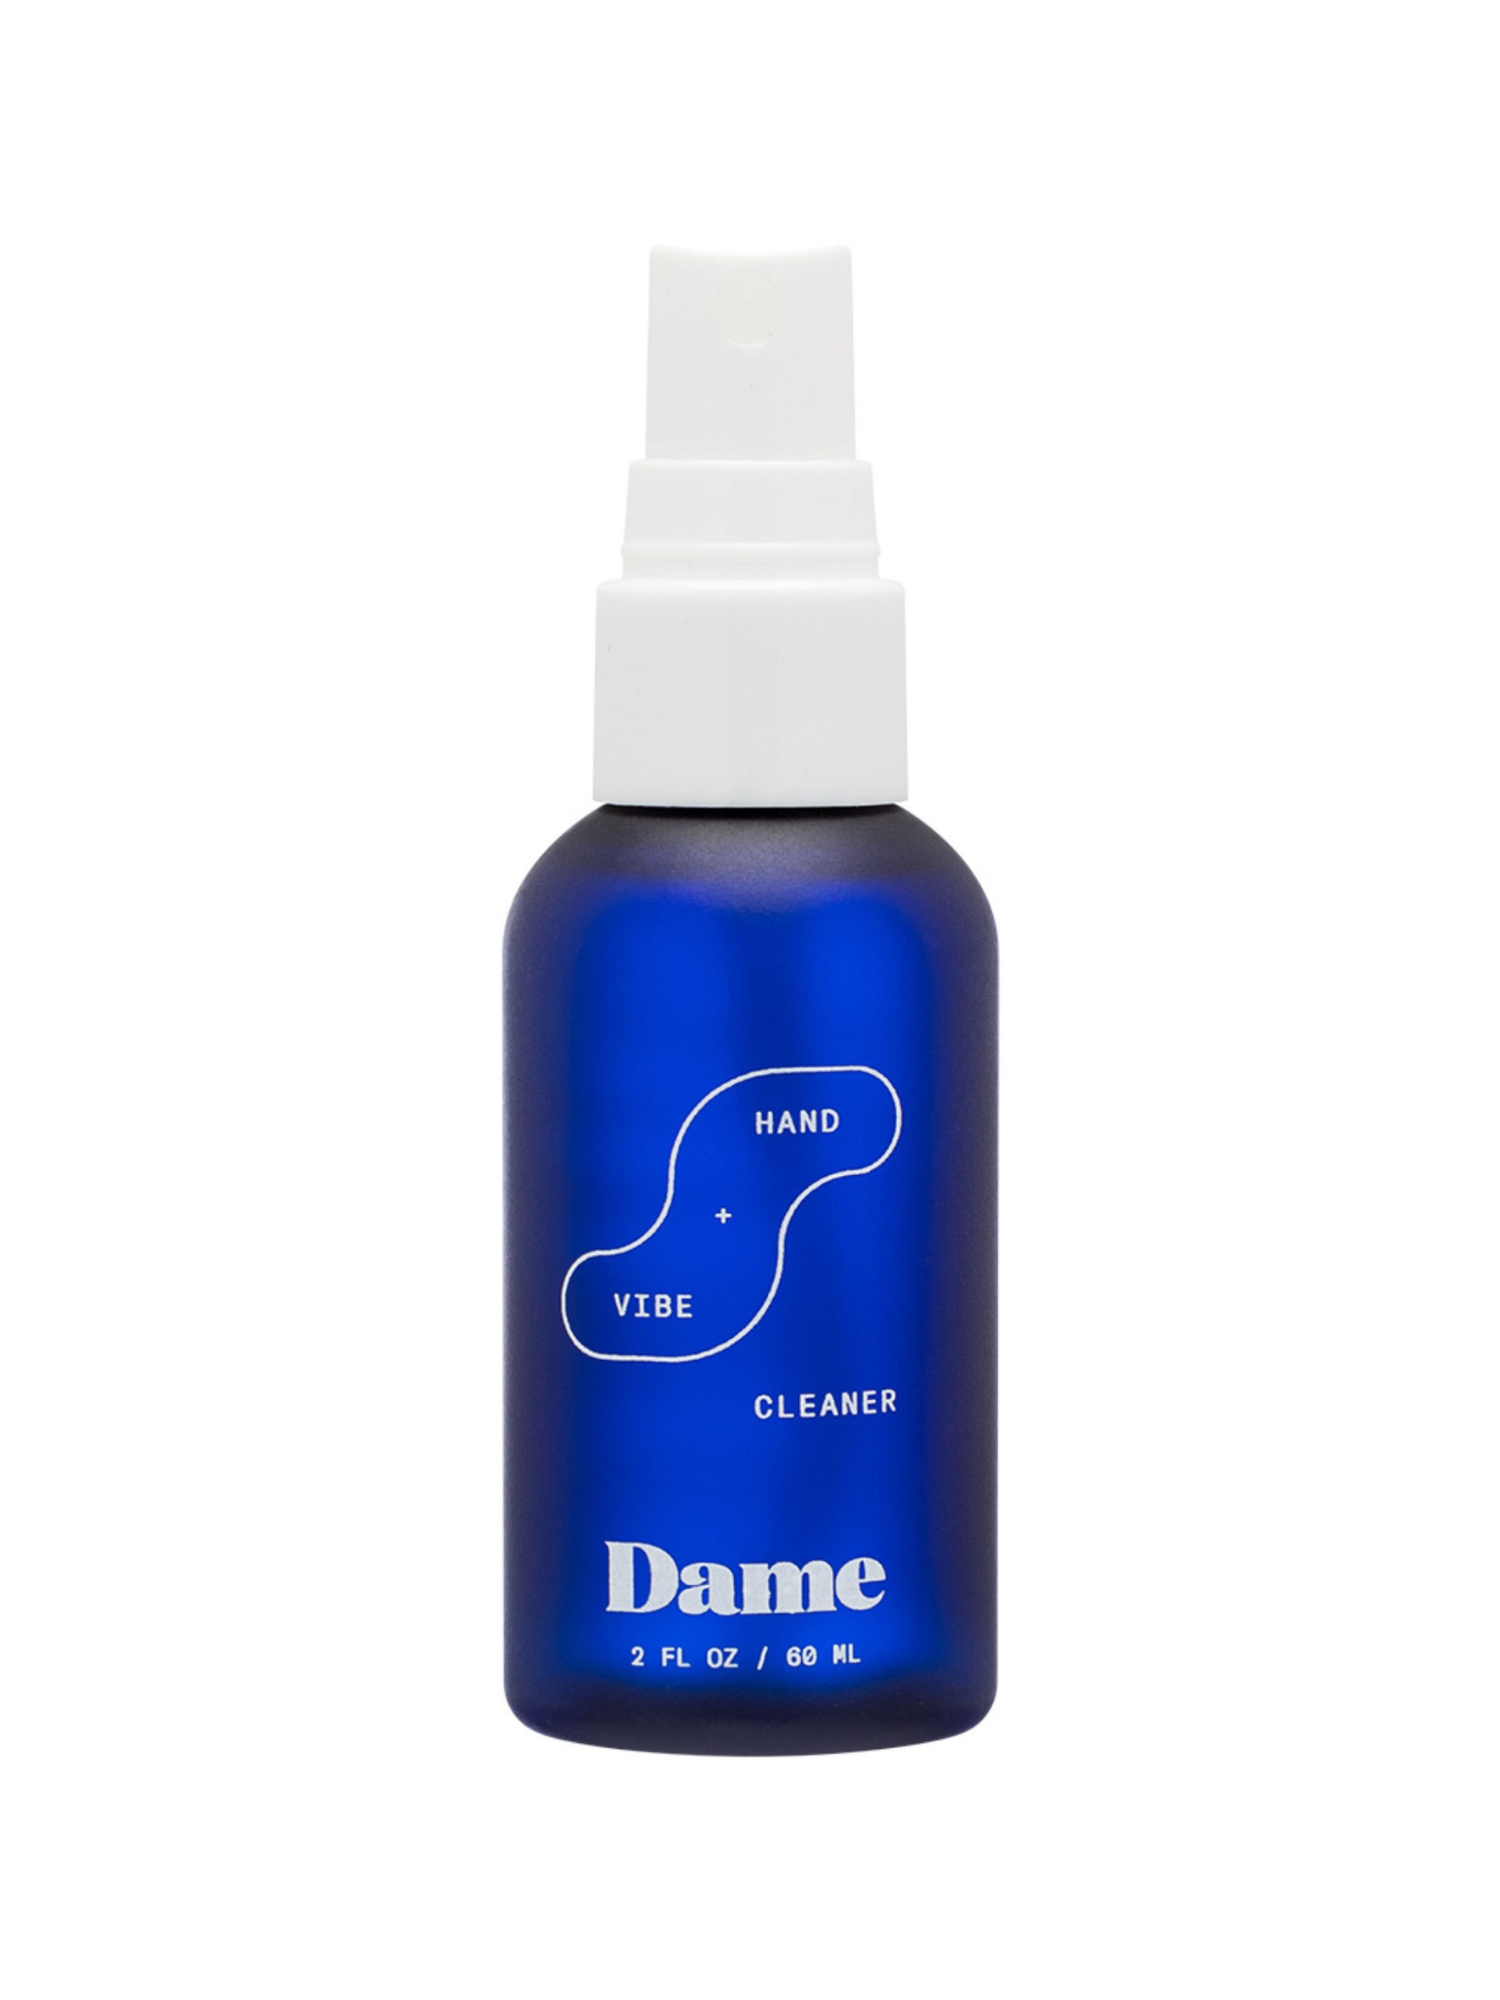 Dame, Hand+ Vibe Cleaner, Sanitizer, Sanitiser, Hand Sanitiser, Sex Toy Cleaner. Waterproof. Clinically Proven To Kill 99,9% of germs. Naturally Derived Ingredients. Paraben Free, Glycerin Free. Nourished. Nourishedeu